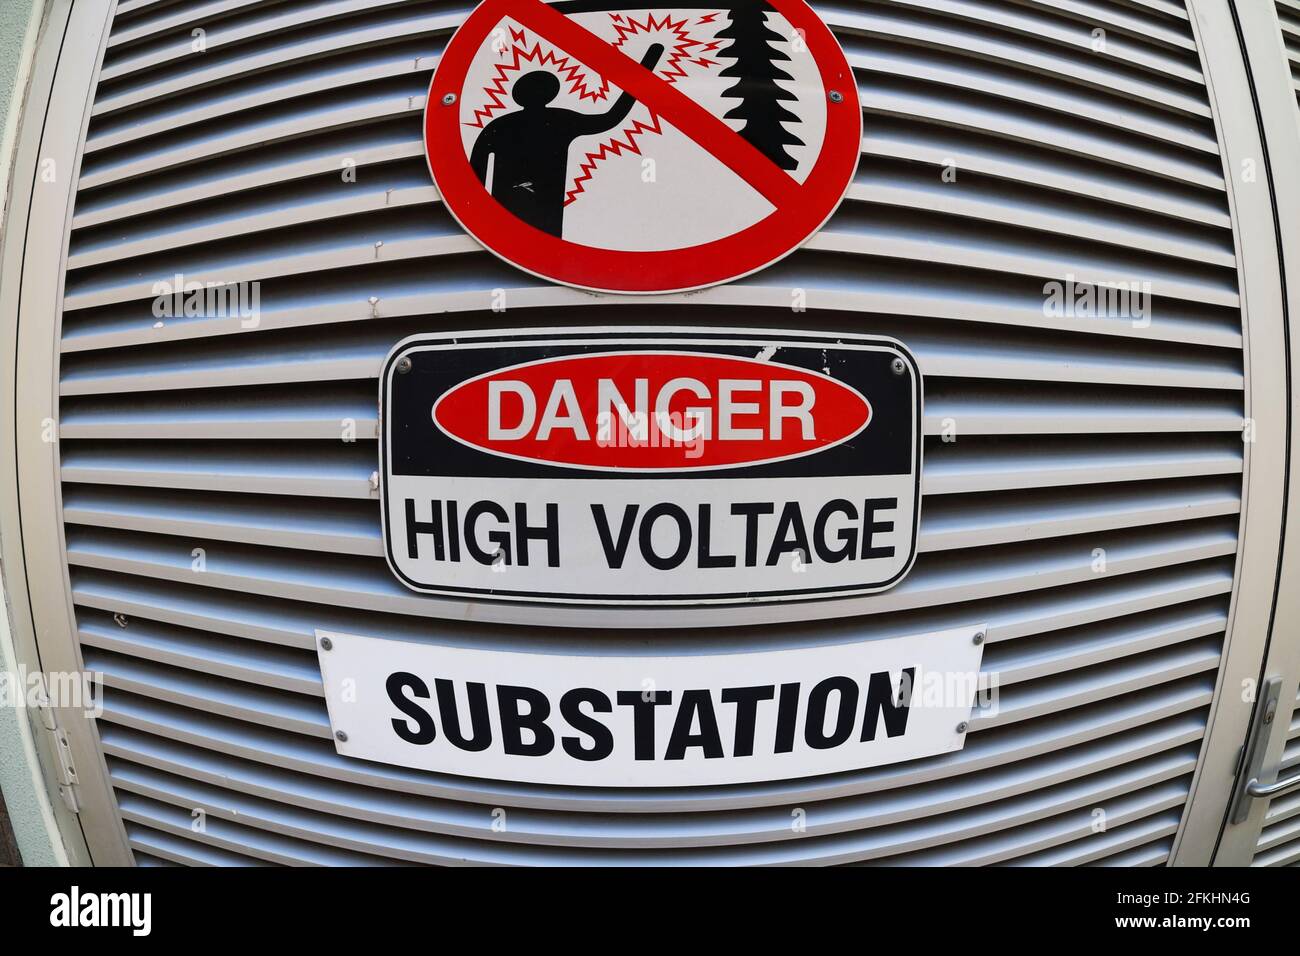 Danger high voltage substation sign shot with fish eye effect Stock Photo